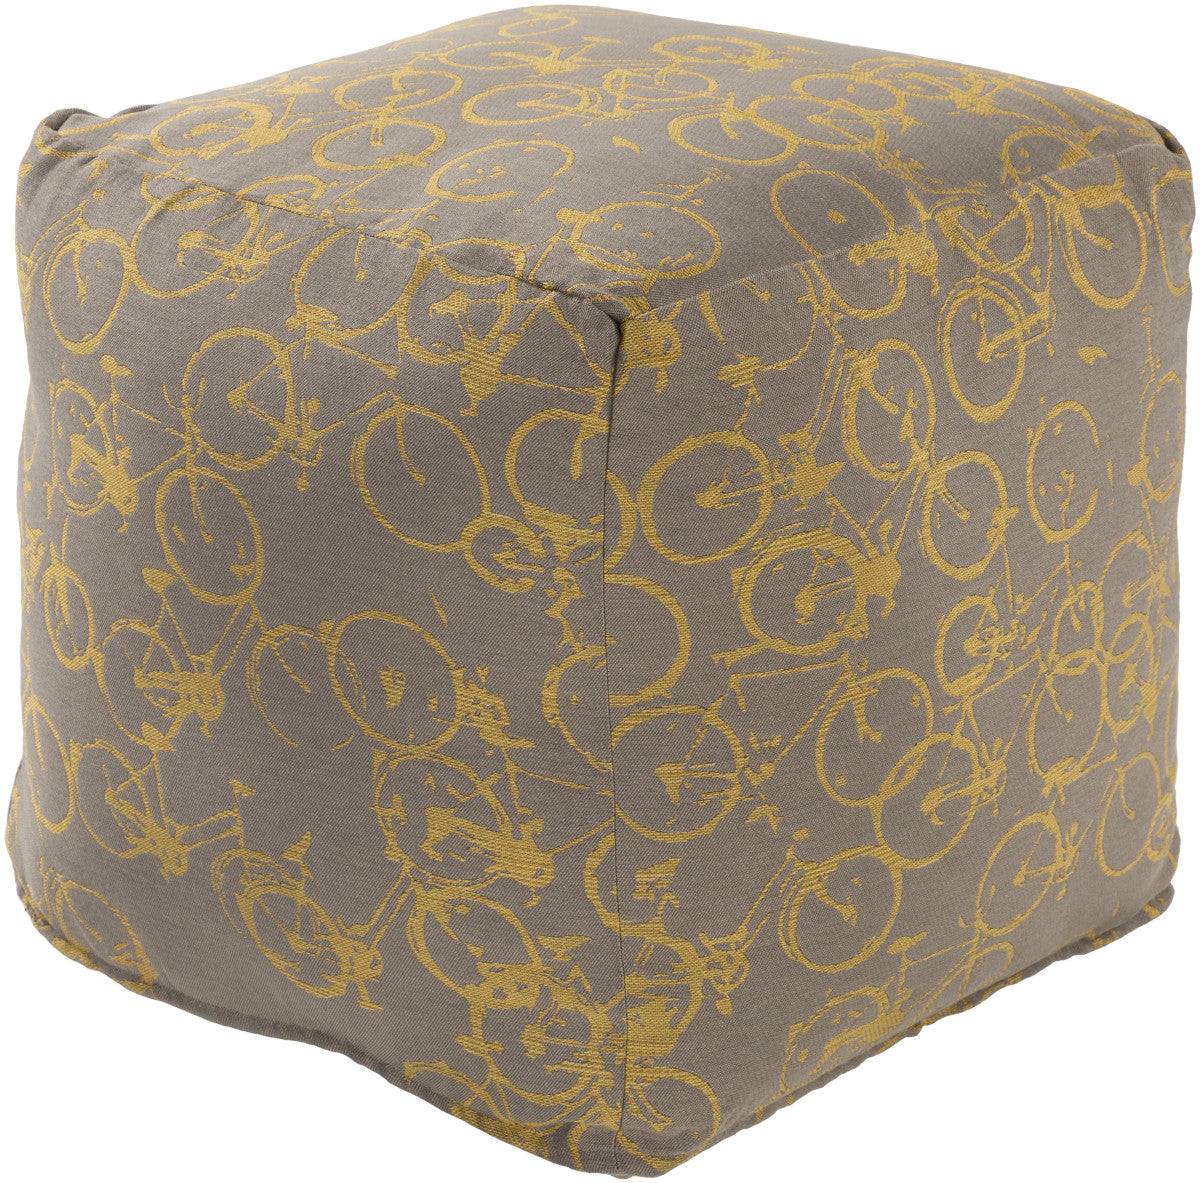 Surya Peddle Power PDPF-002 Neutral Pouf by Mike Farrell